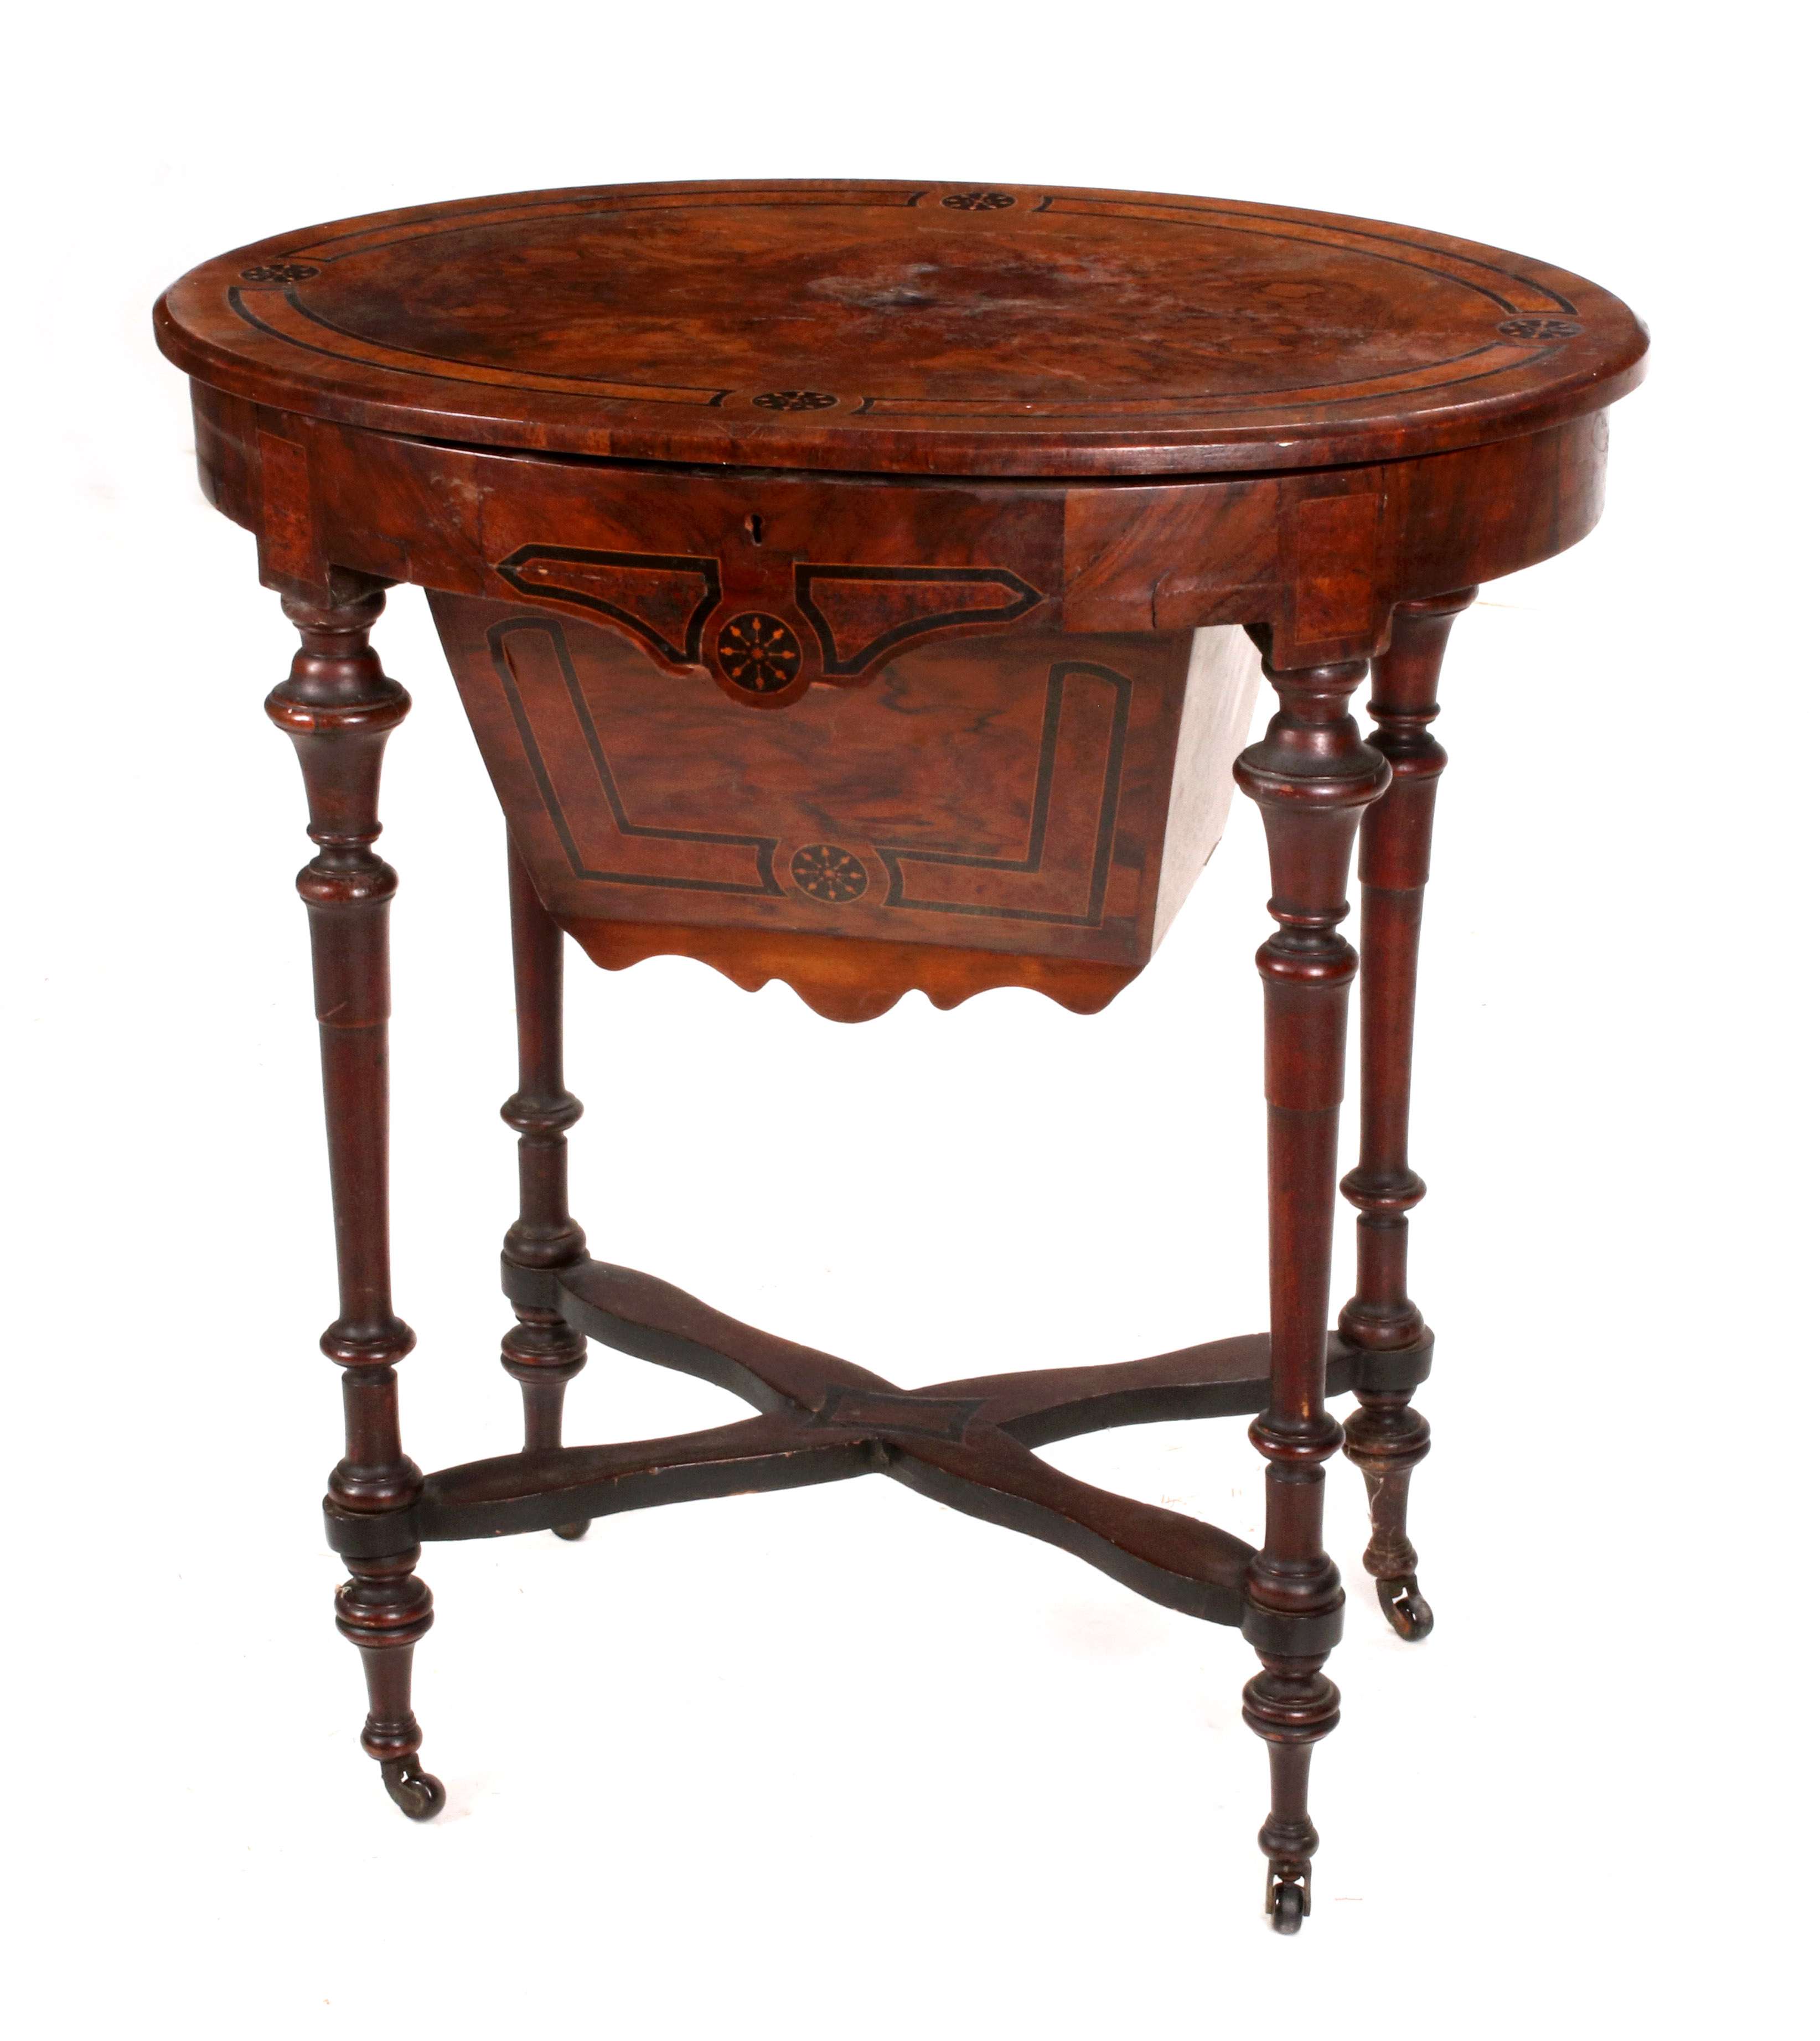 A VICTORIAN RENAISSANCE SEWING STAND WITH INLAY